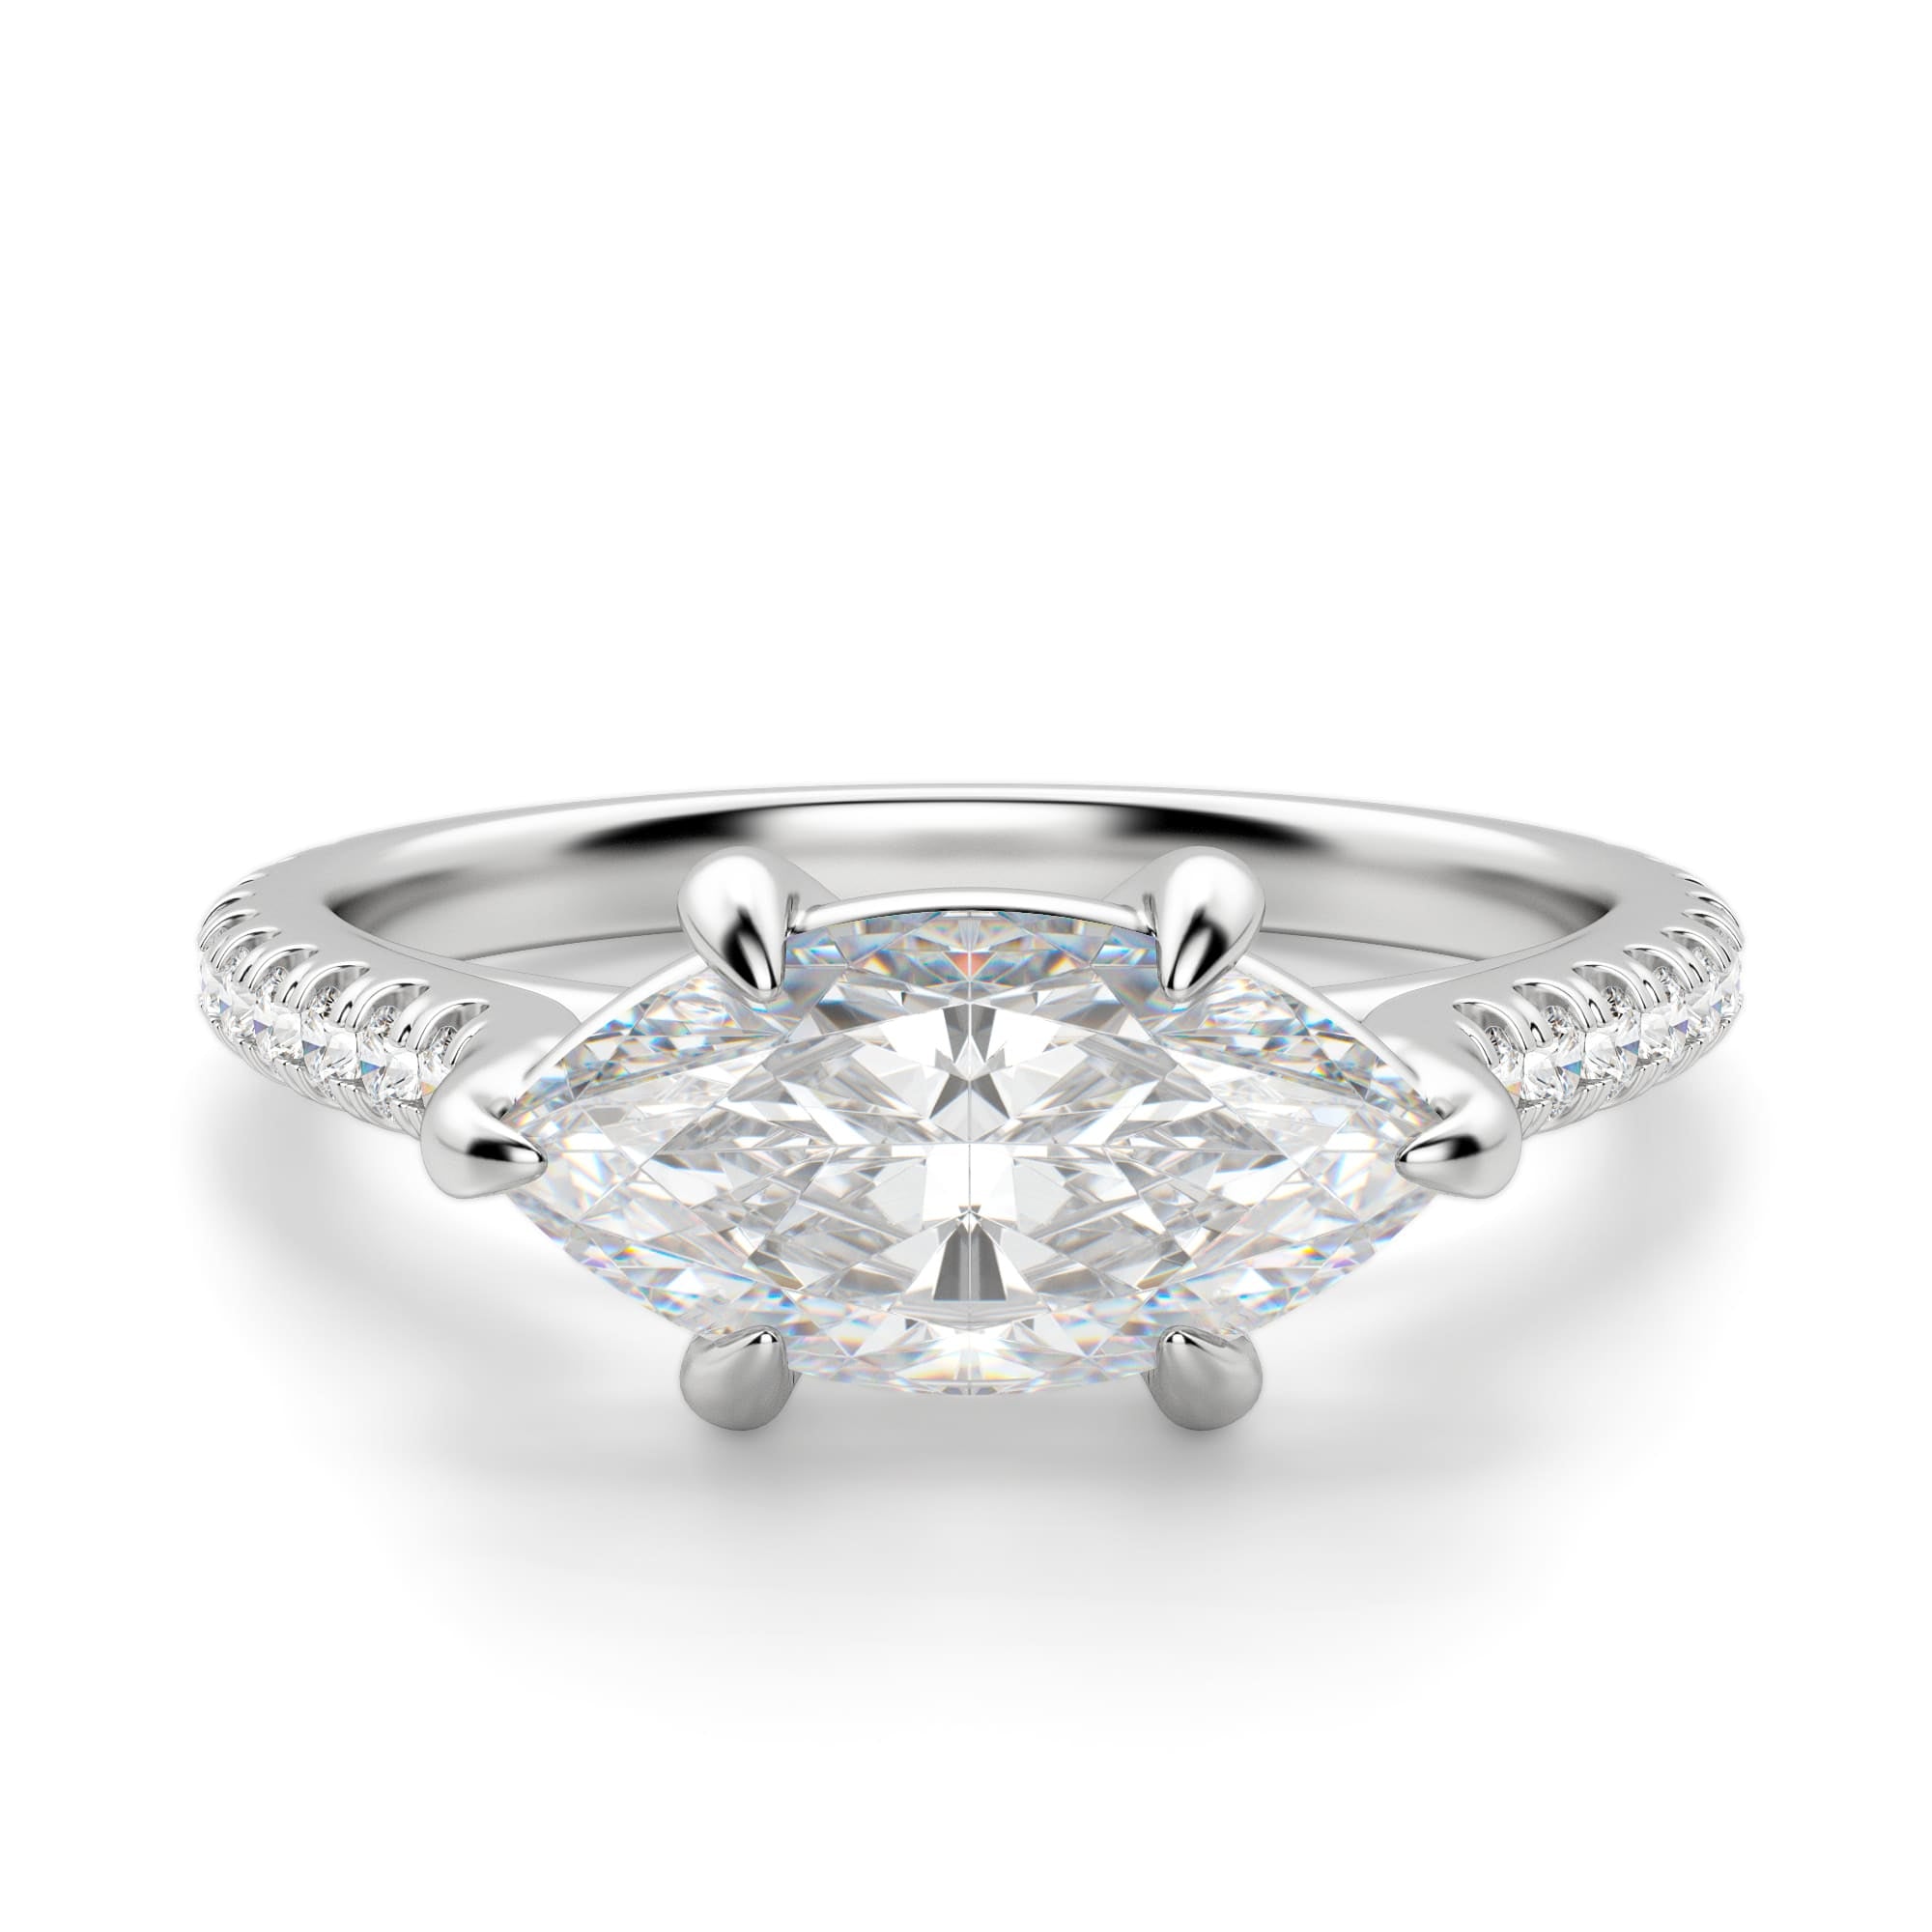 East to West Marquise Cut Pave Set Moissanite Diamond Ring